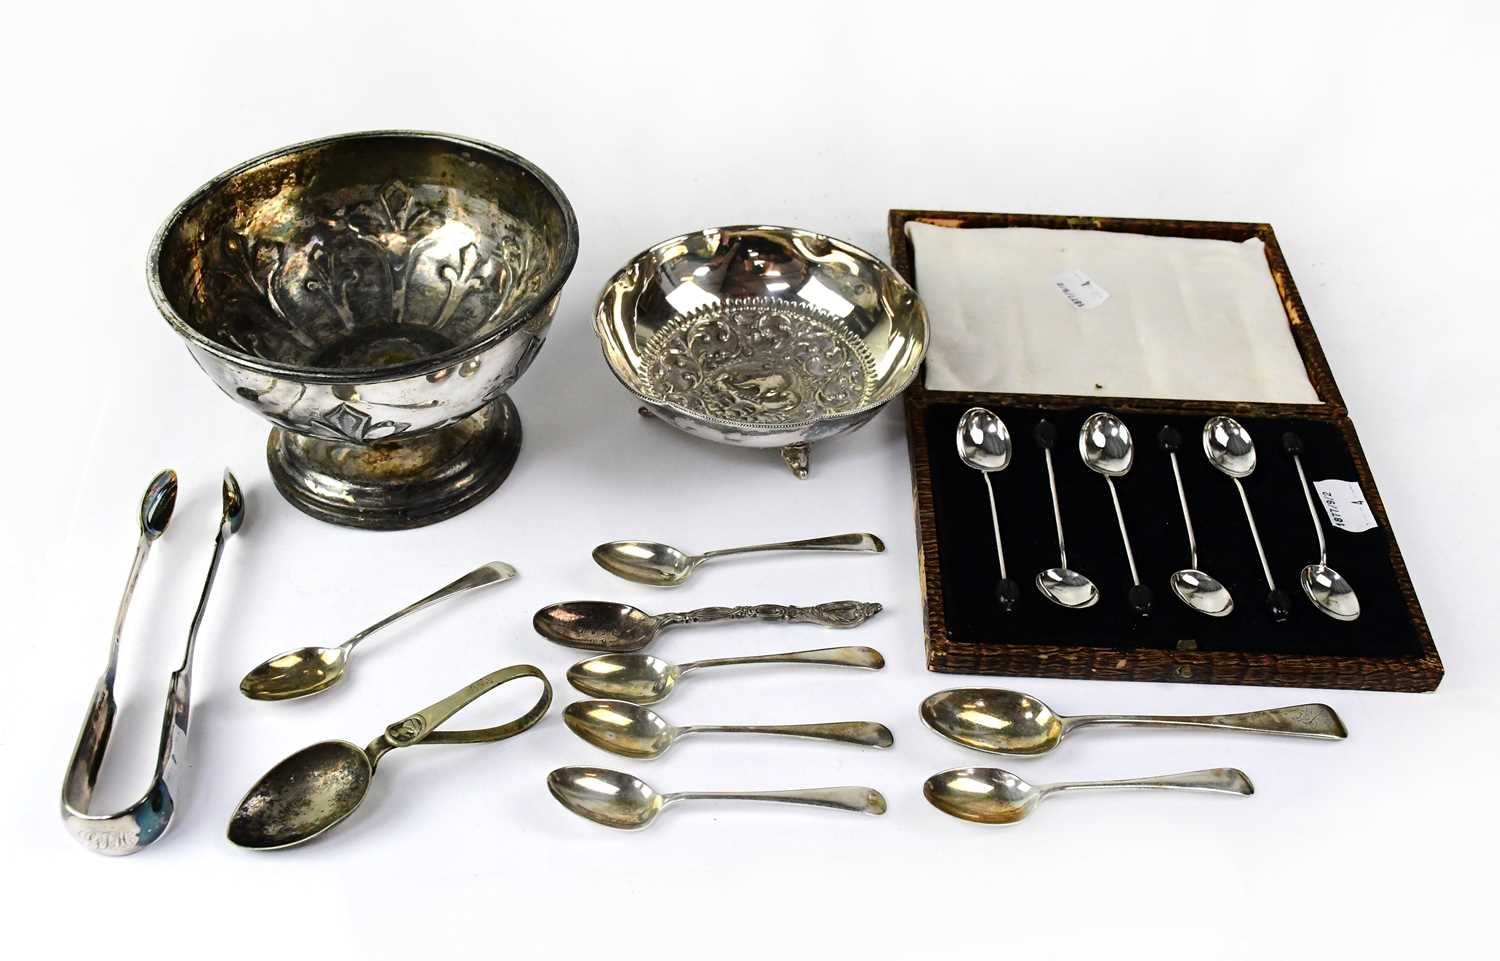 A cased of hallmarked silver coffee bean spoons, a set of five hallmarked silver mismatched